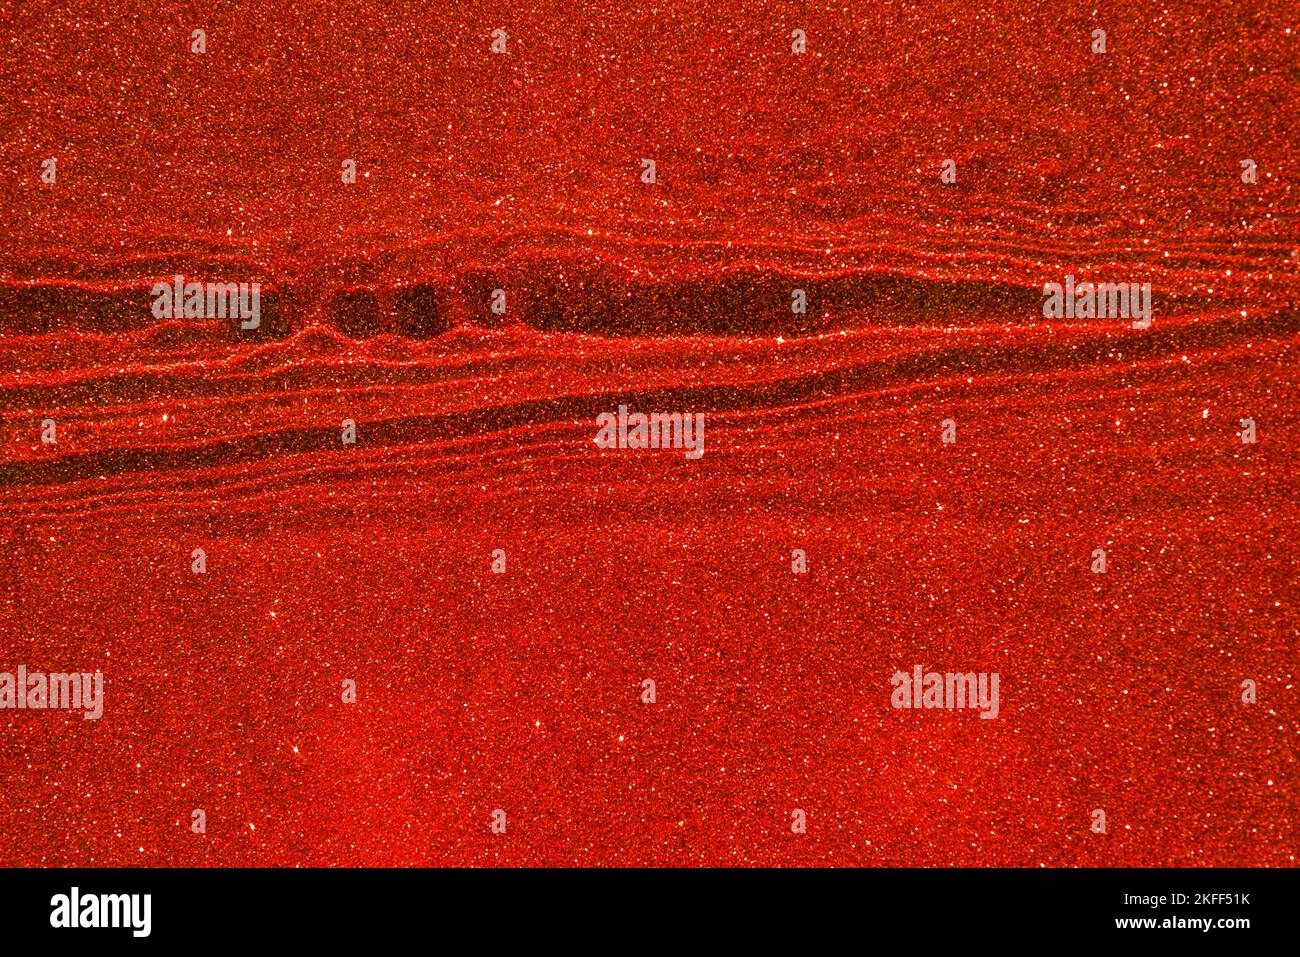 Shining red abstract background with pattern, red glitter texture High quality photo Stock Photo